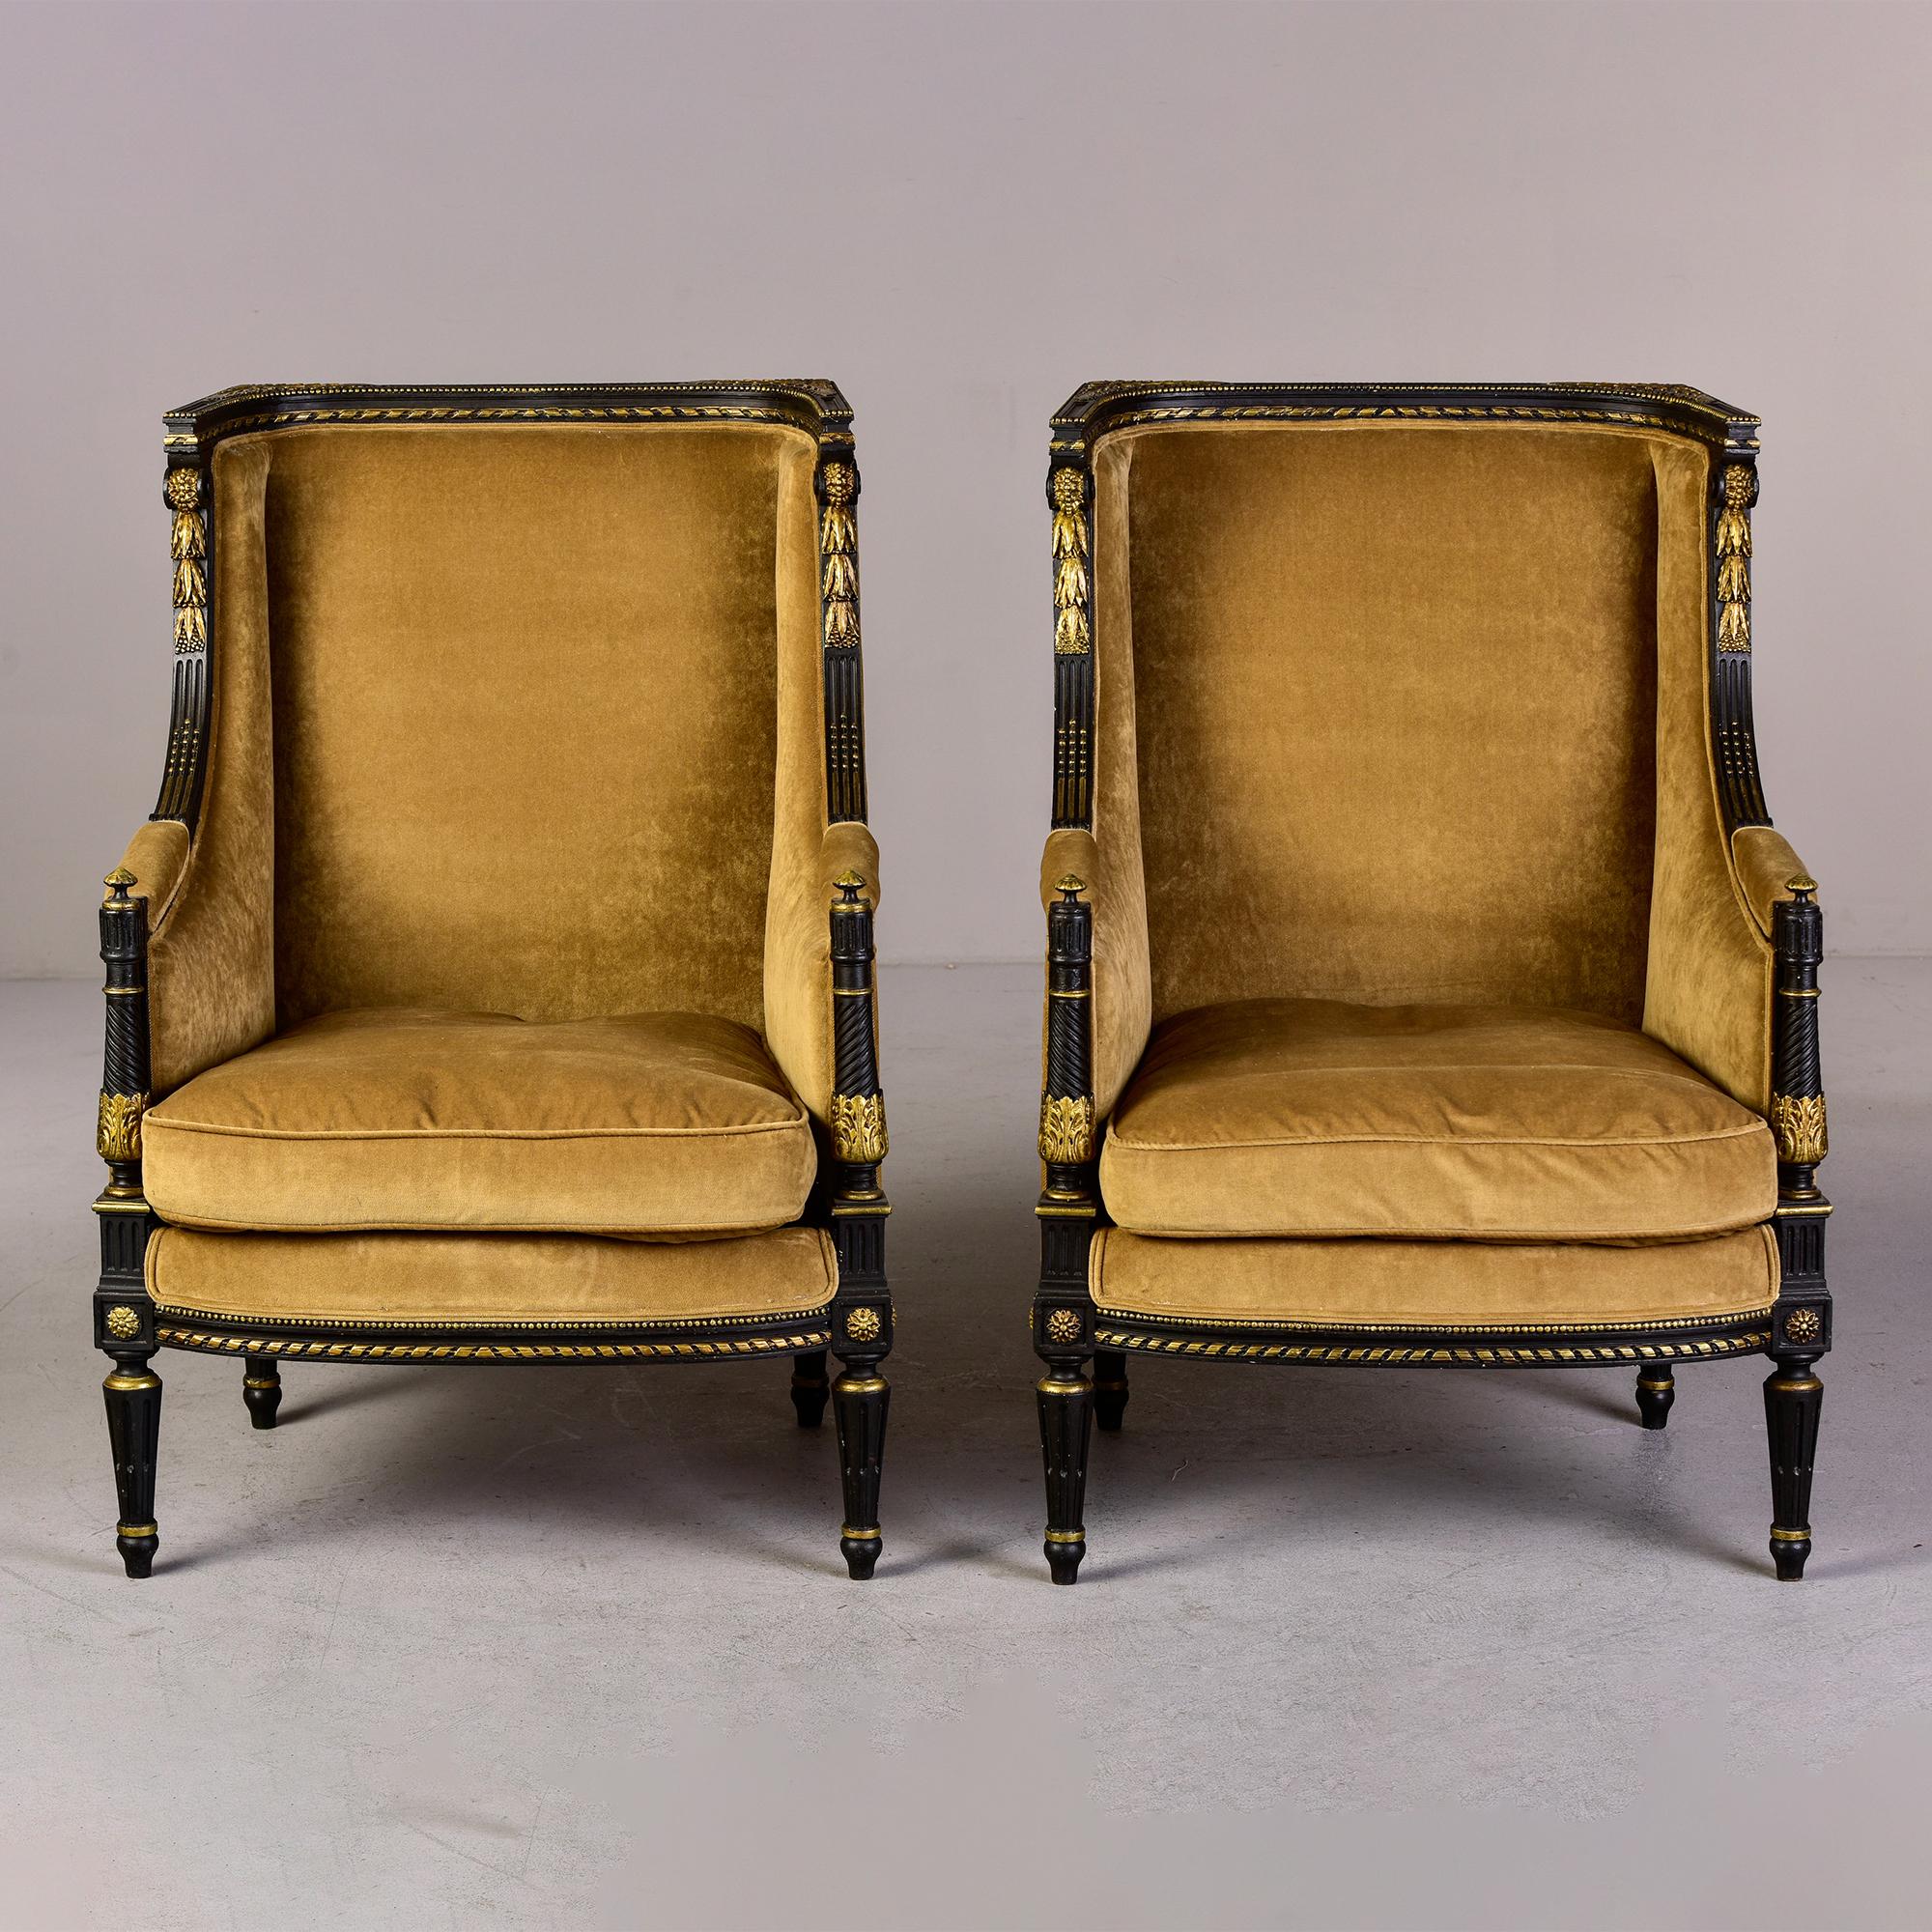 Circa 1840s pair of Louis XVI style bergeres with tall backs and winged sides, ebonised frames with lots of finely carved and gilded detail. Newly upholstered before we acquired them - the fabric is a dark camel colored chenille velvet. Unknown